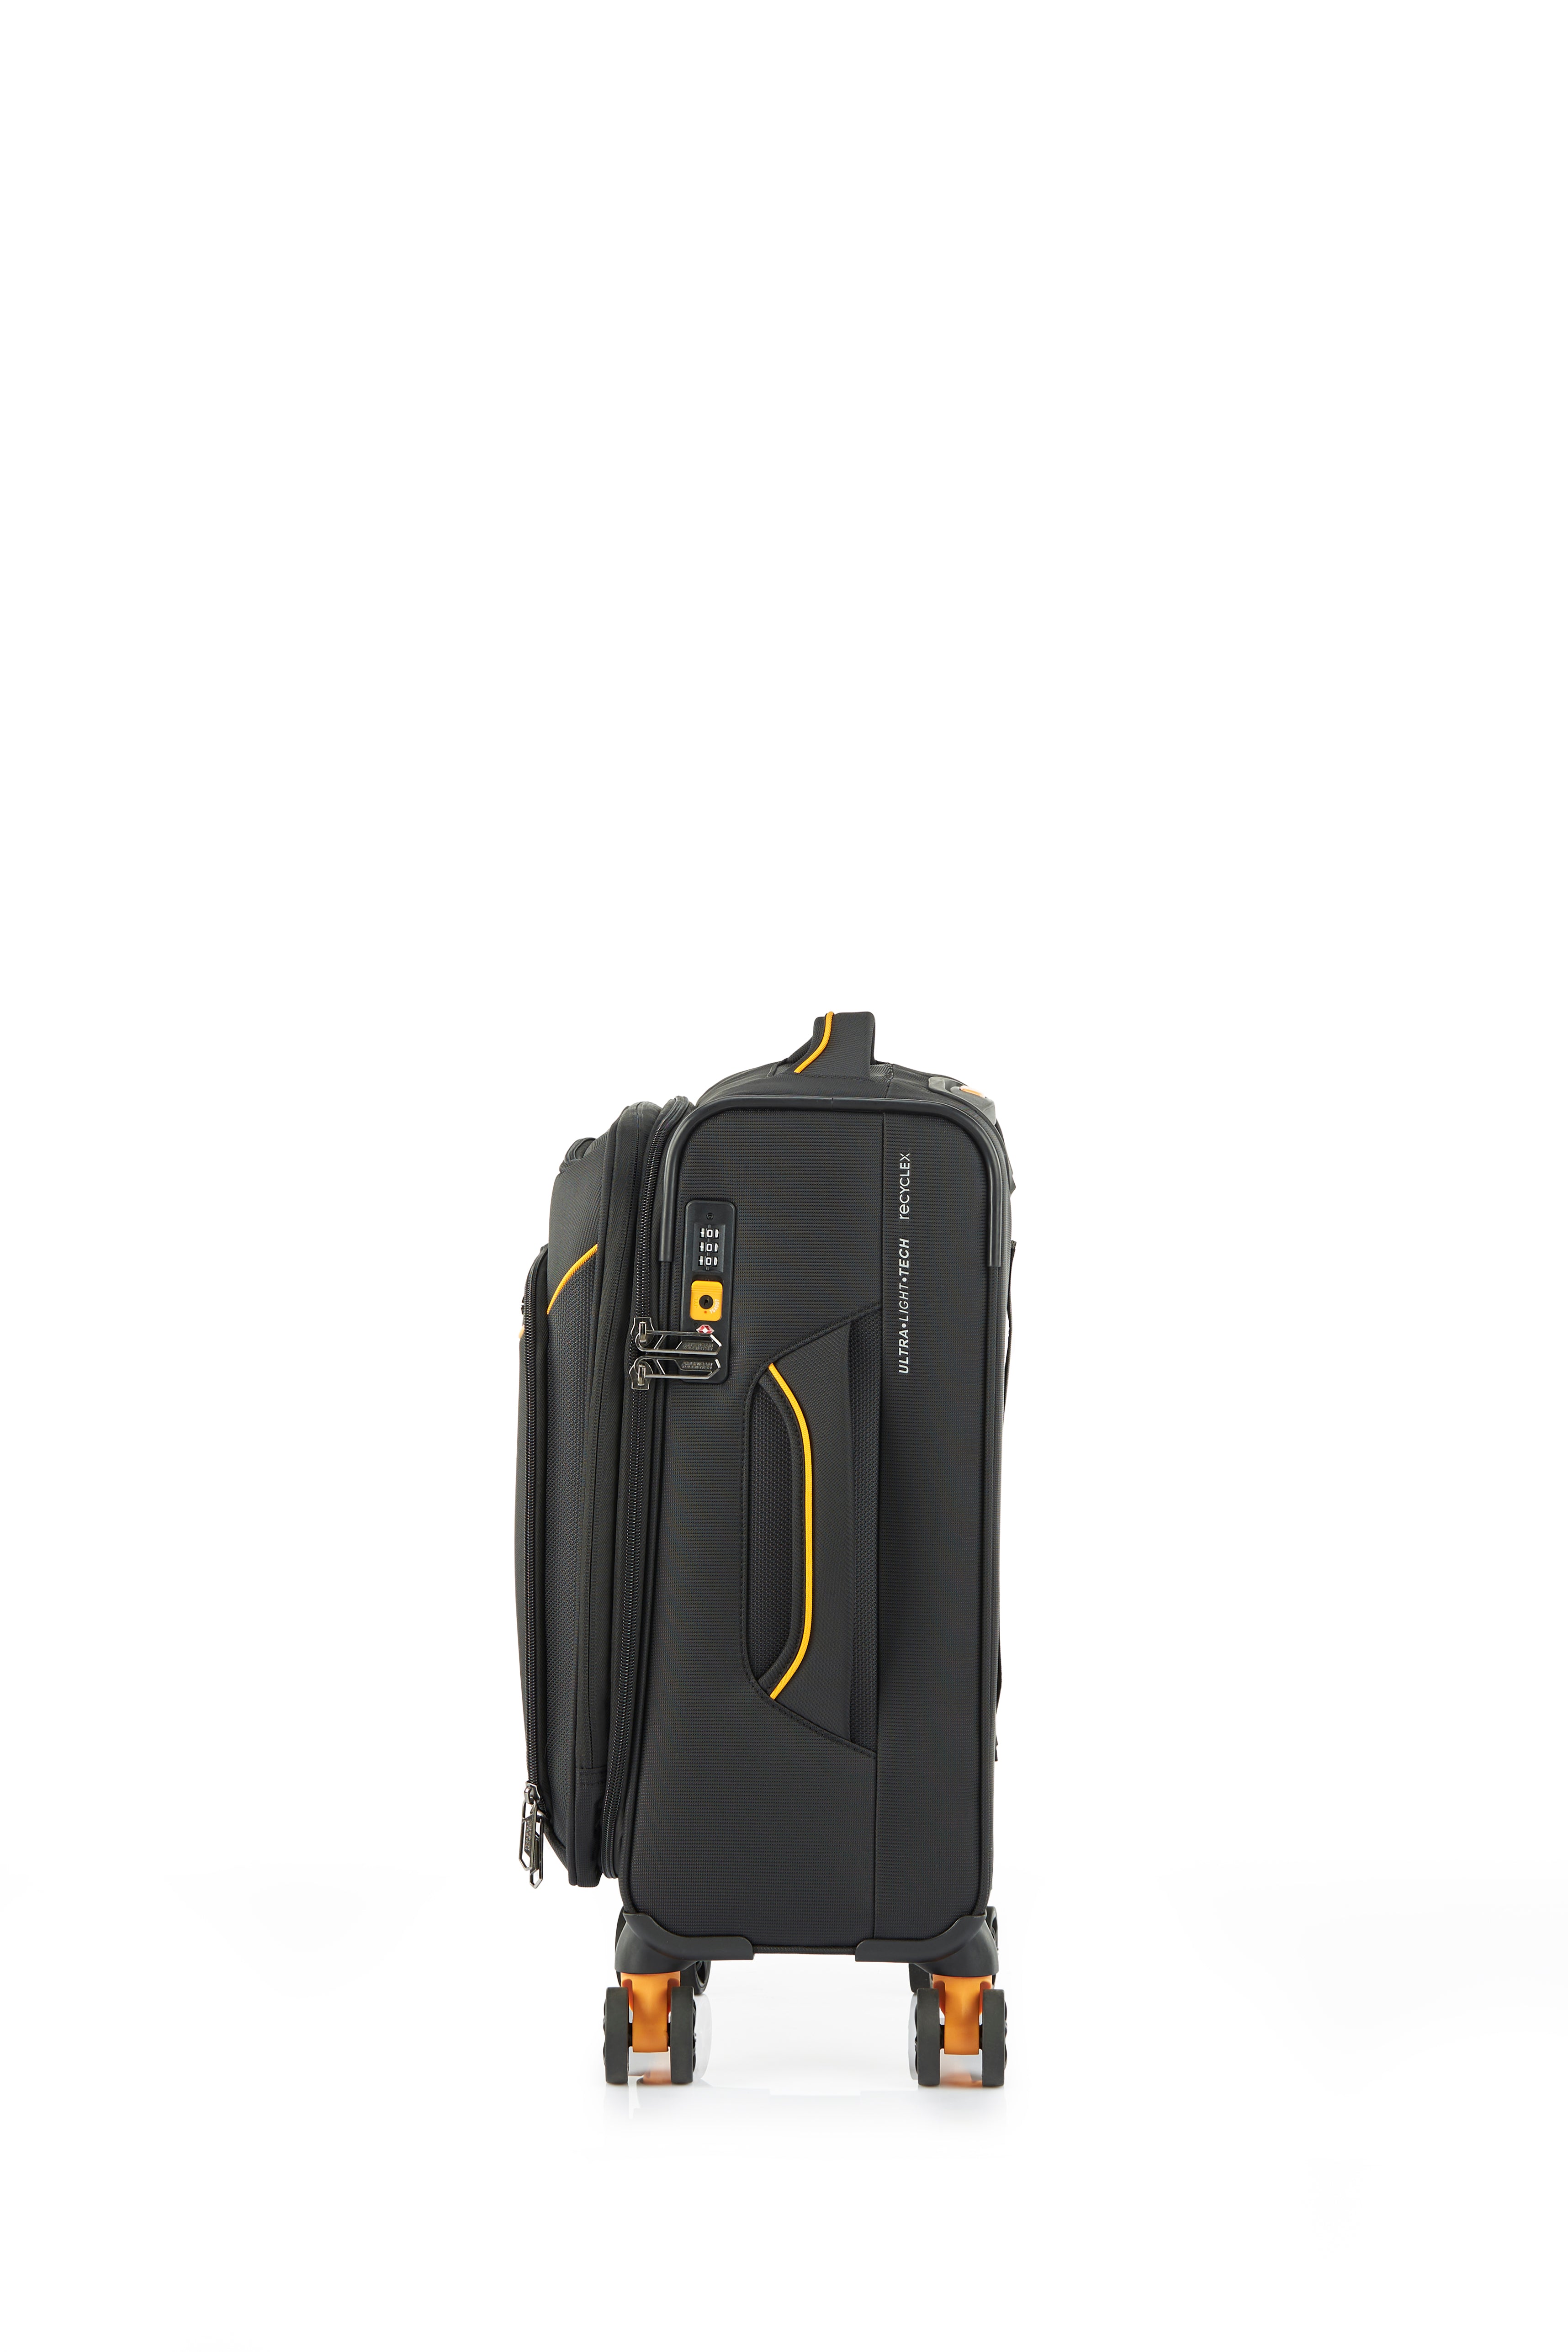 American Tourister - Applite ECO 55cm Small Suitcase - Black/Must-4